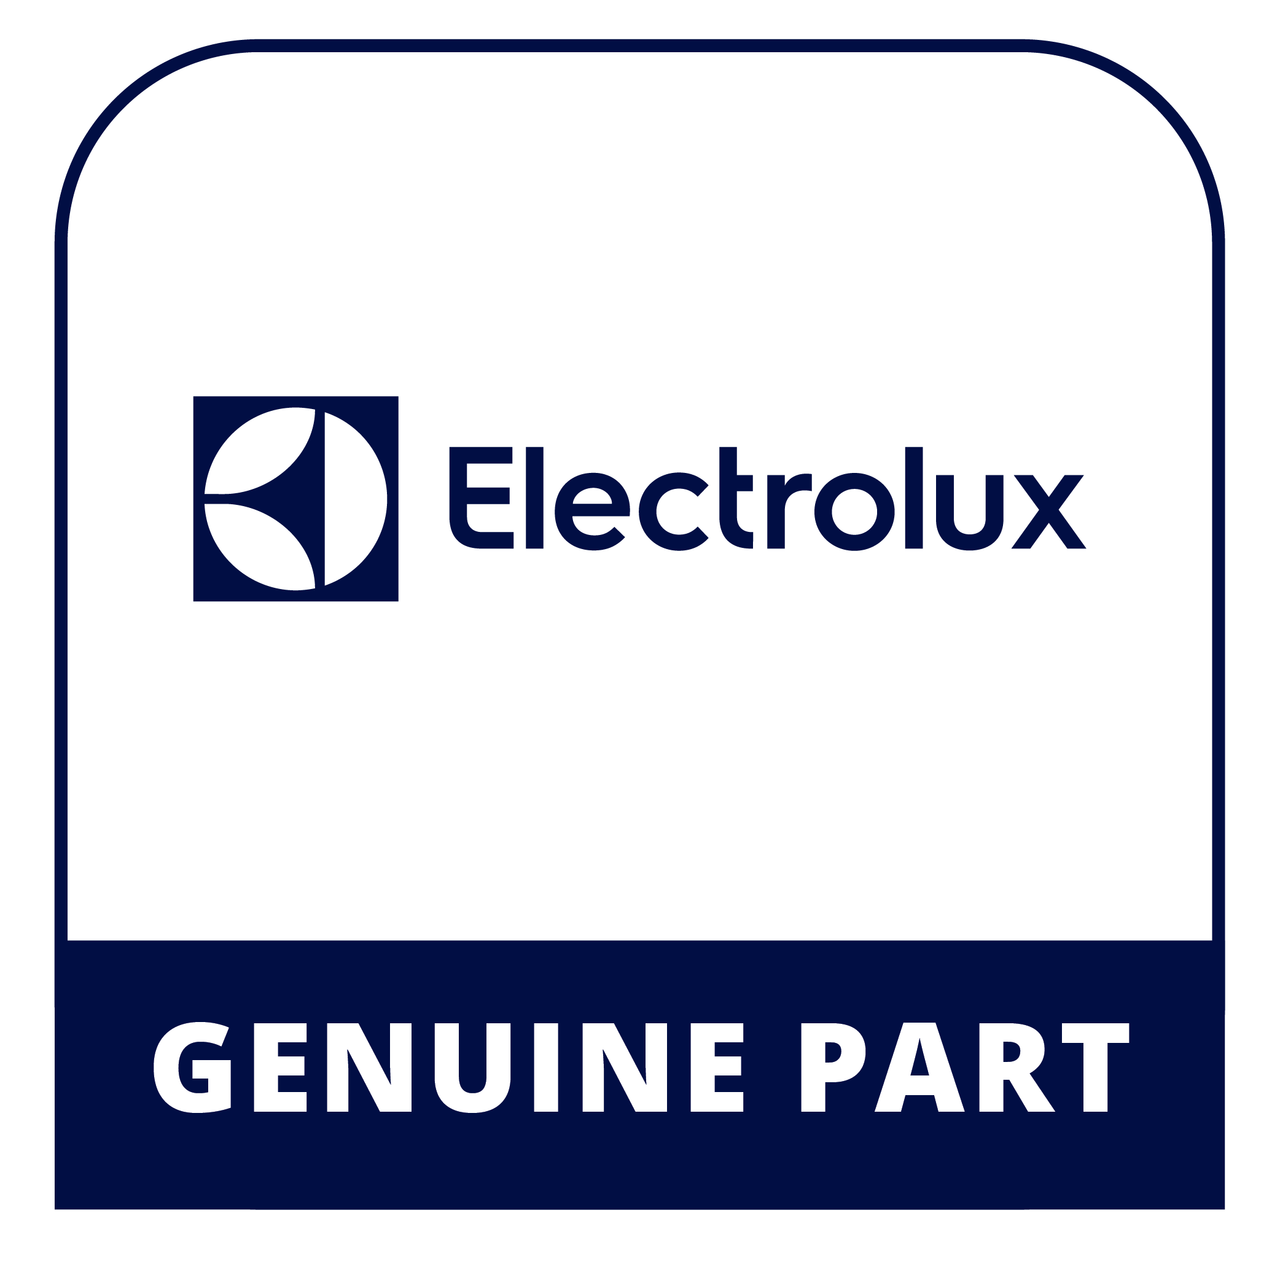 Frigidaire - Electrolux 5304501613 Owners Manual - Genuine Electrolux Part